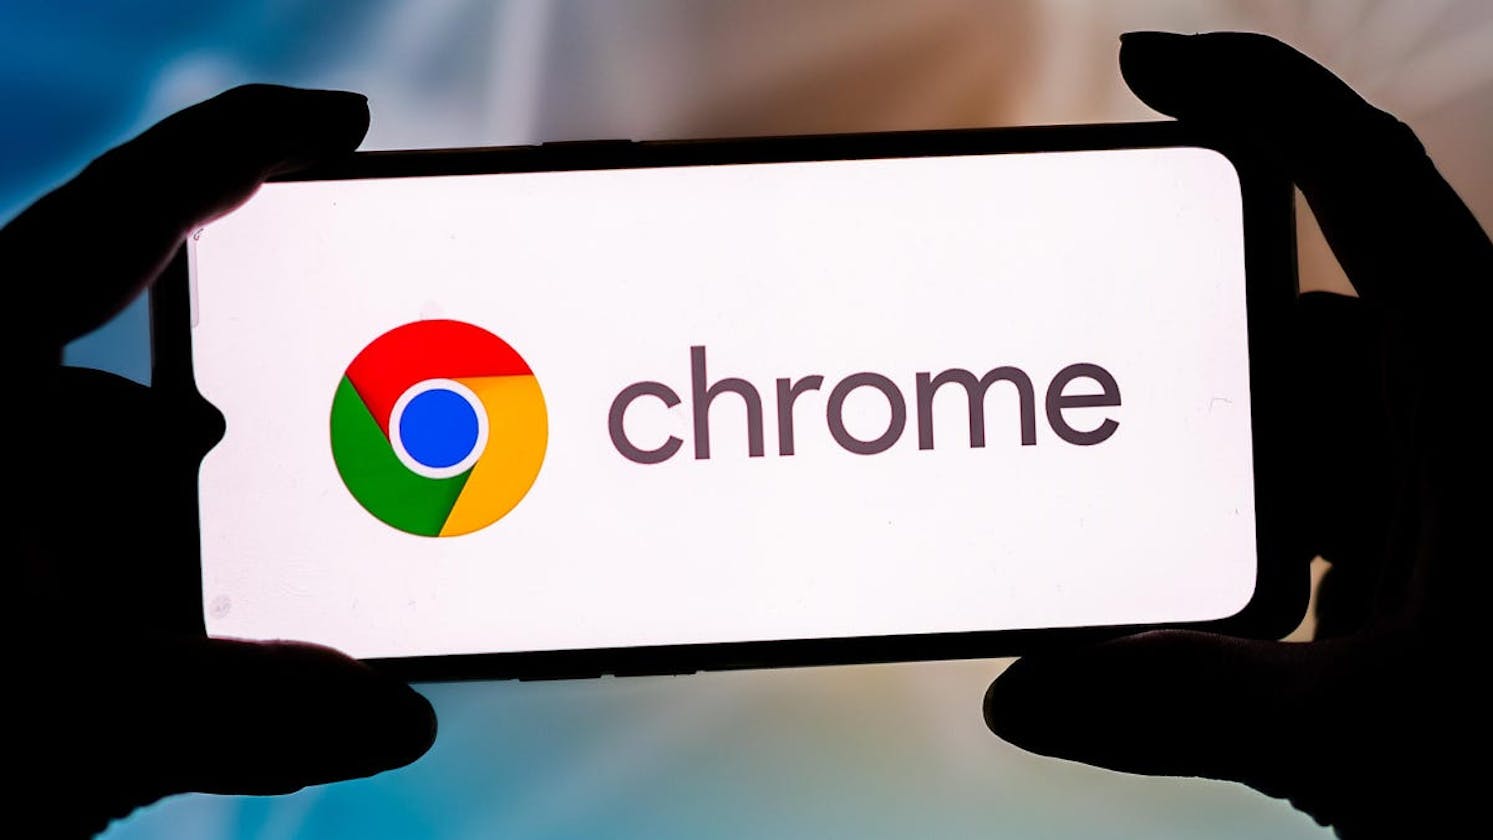 Google Chrome User Guide for Android Mobile Users